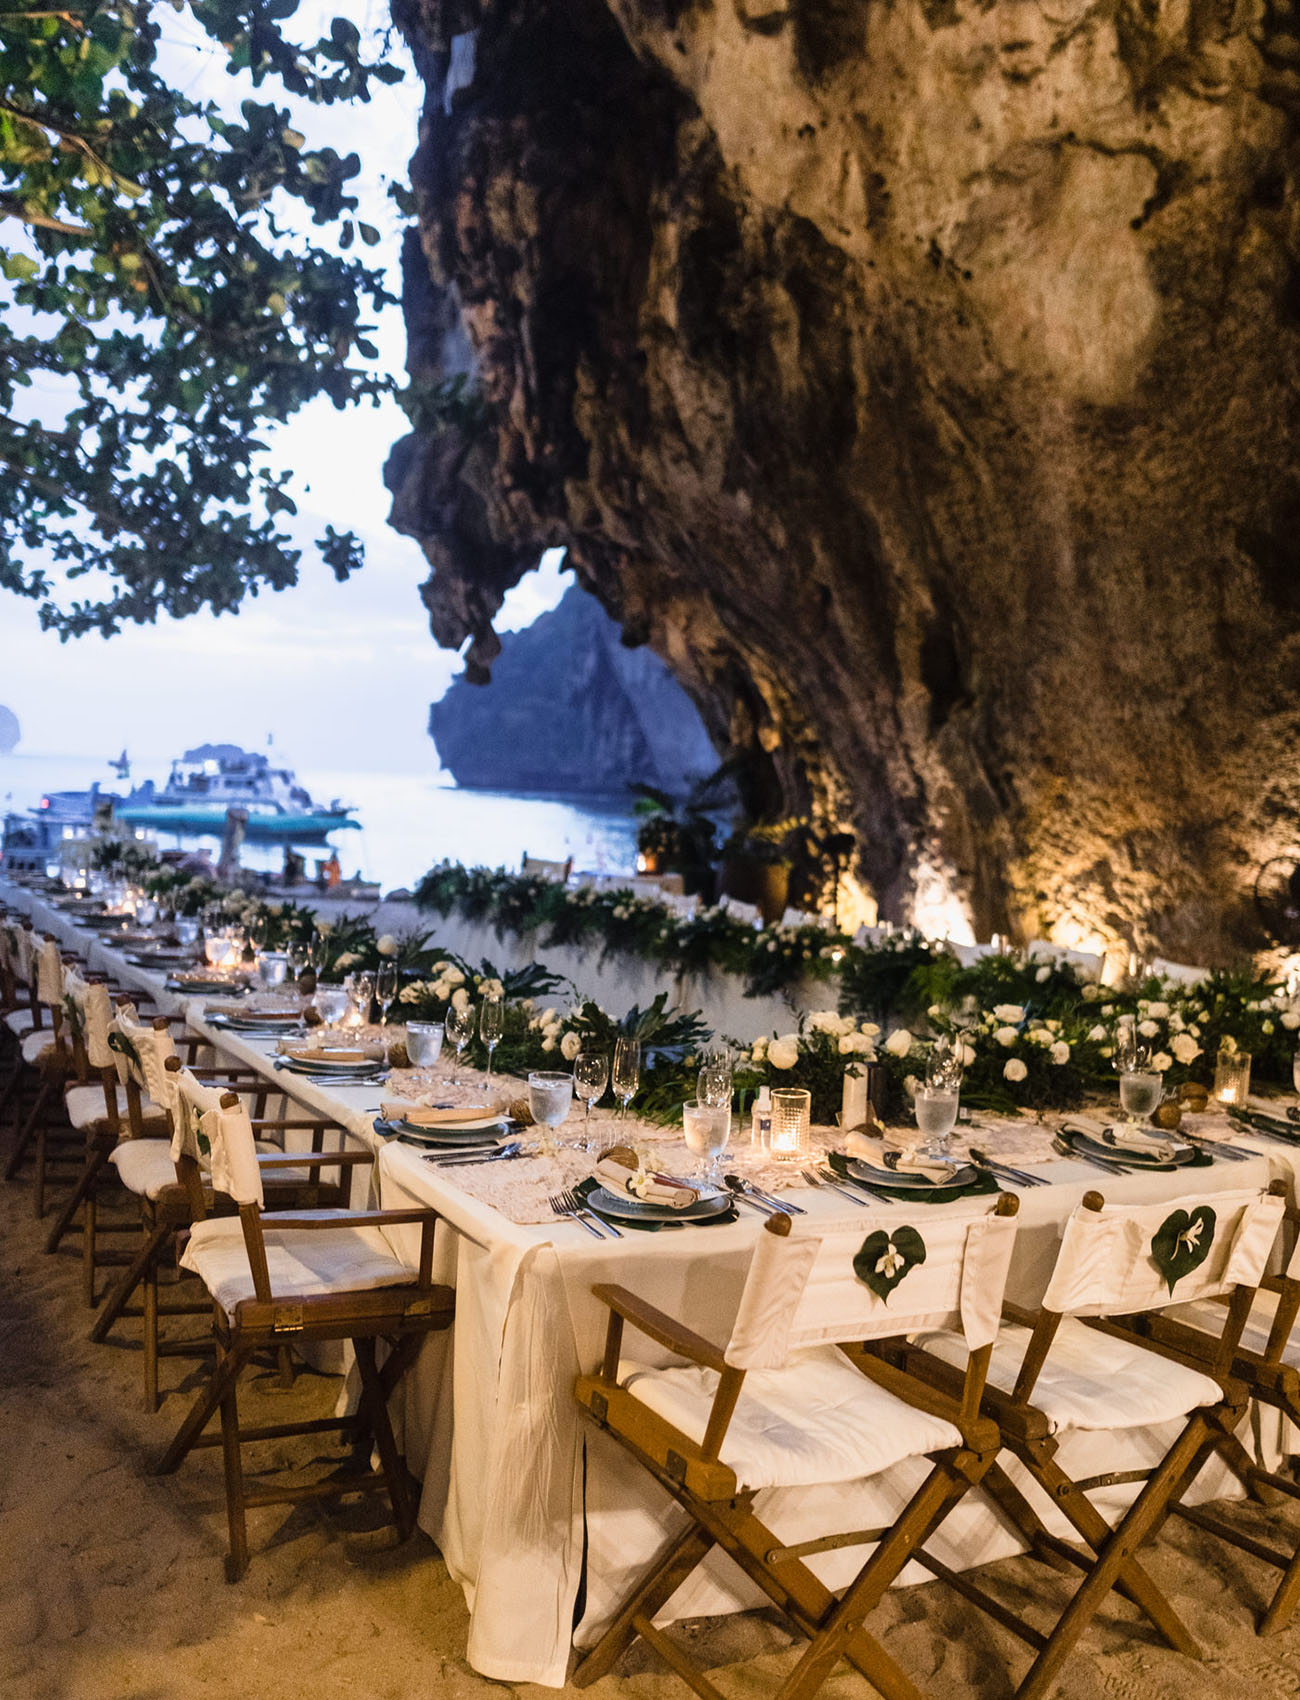 Thailand Wedding in a Cave